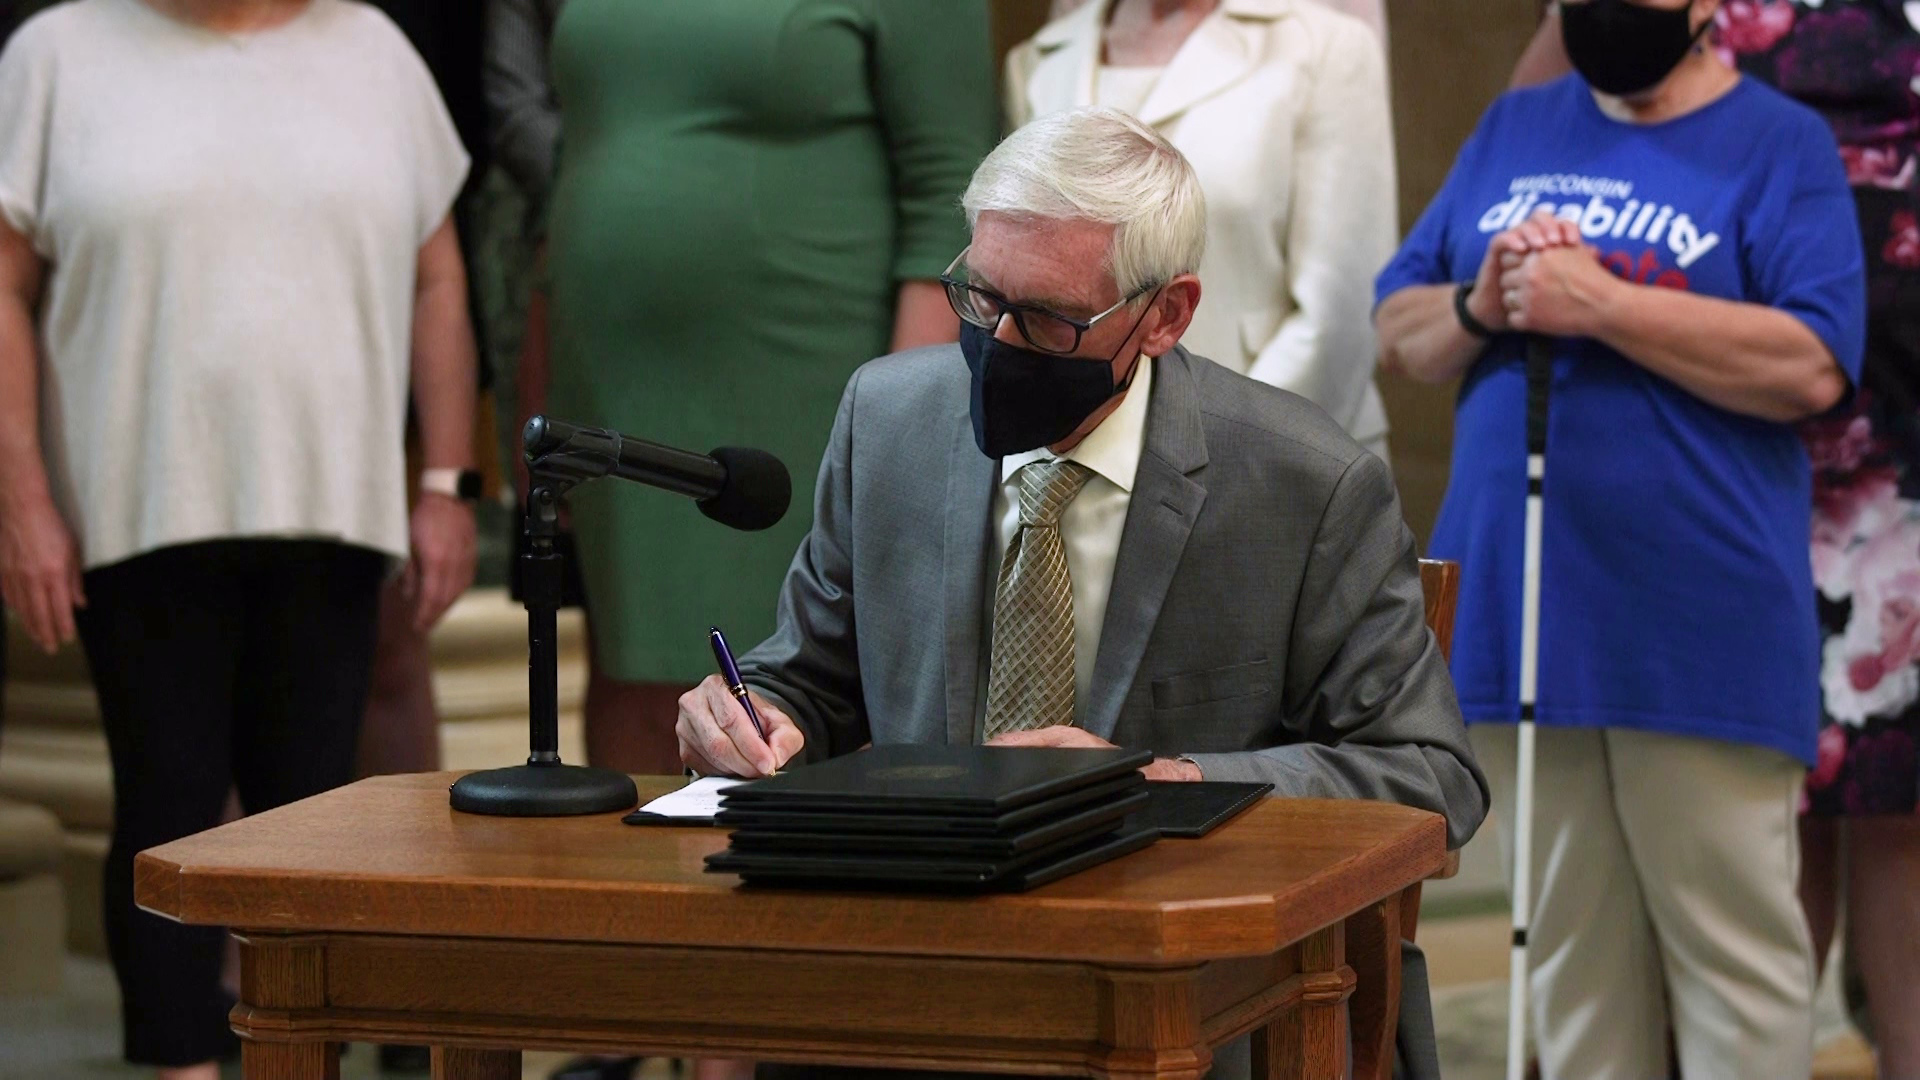 Tony Evers sits at a small, wood table and signs a piece of paper next to a stack of thick folders and a microphone mounted on a stand, with people standing in the background.